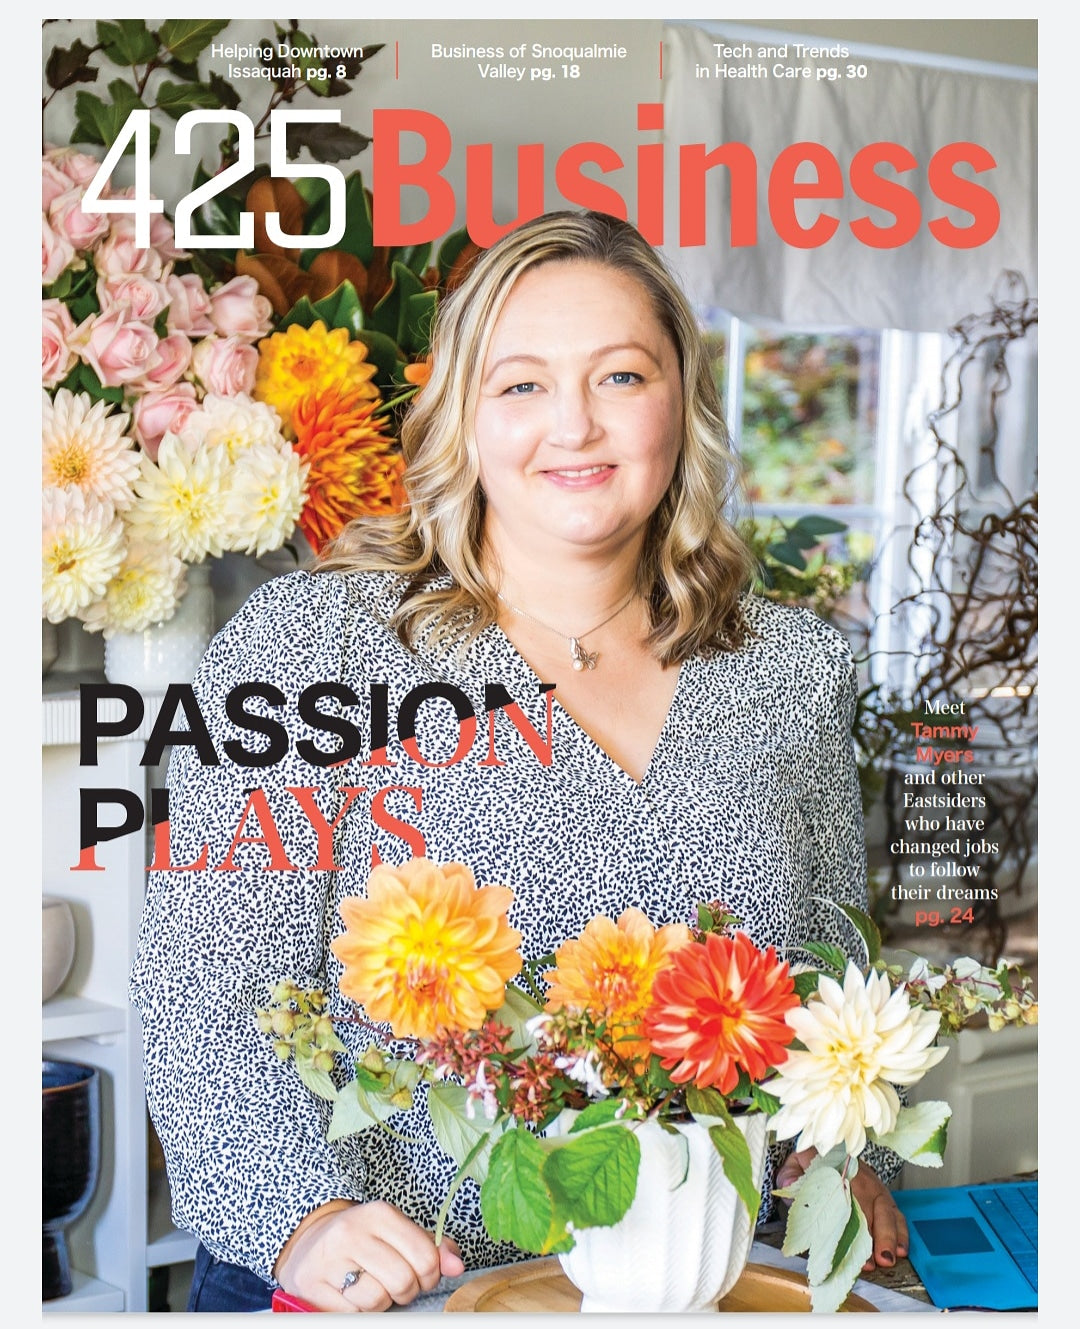 LORA Bloom receives feature in 425 Business Magazine